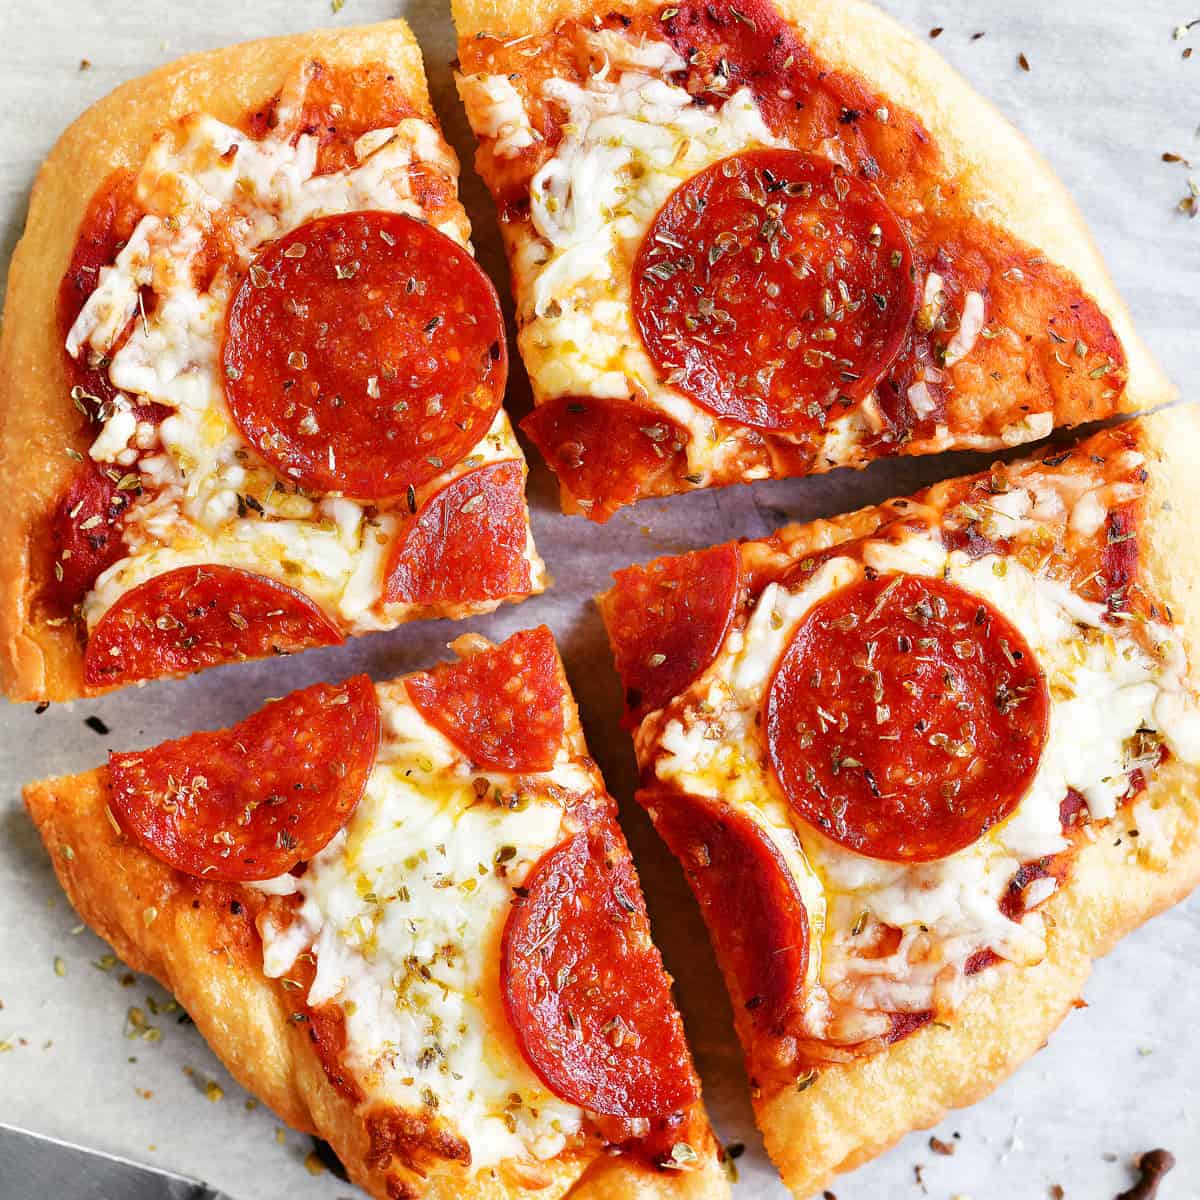 a small pepperoni pizza cut into four slices.